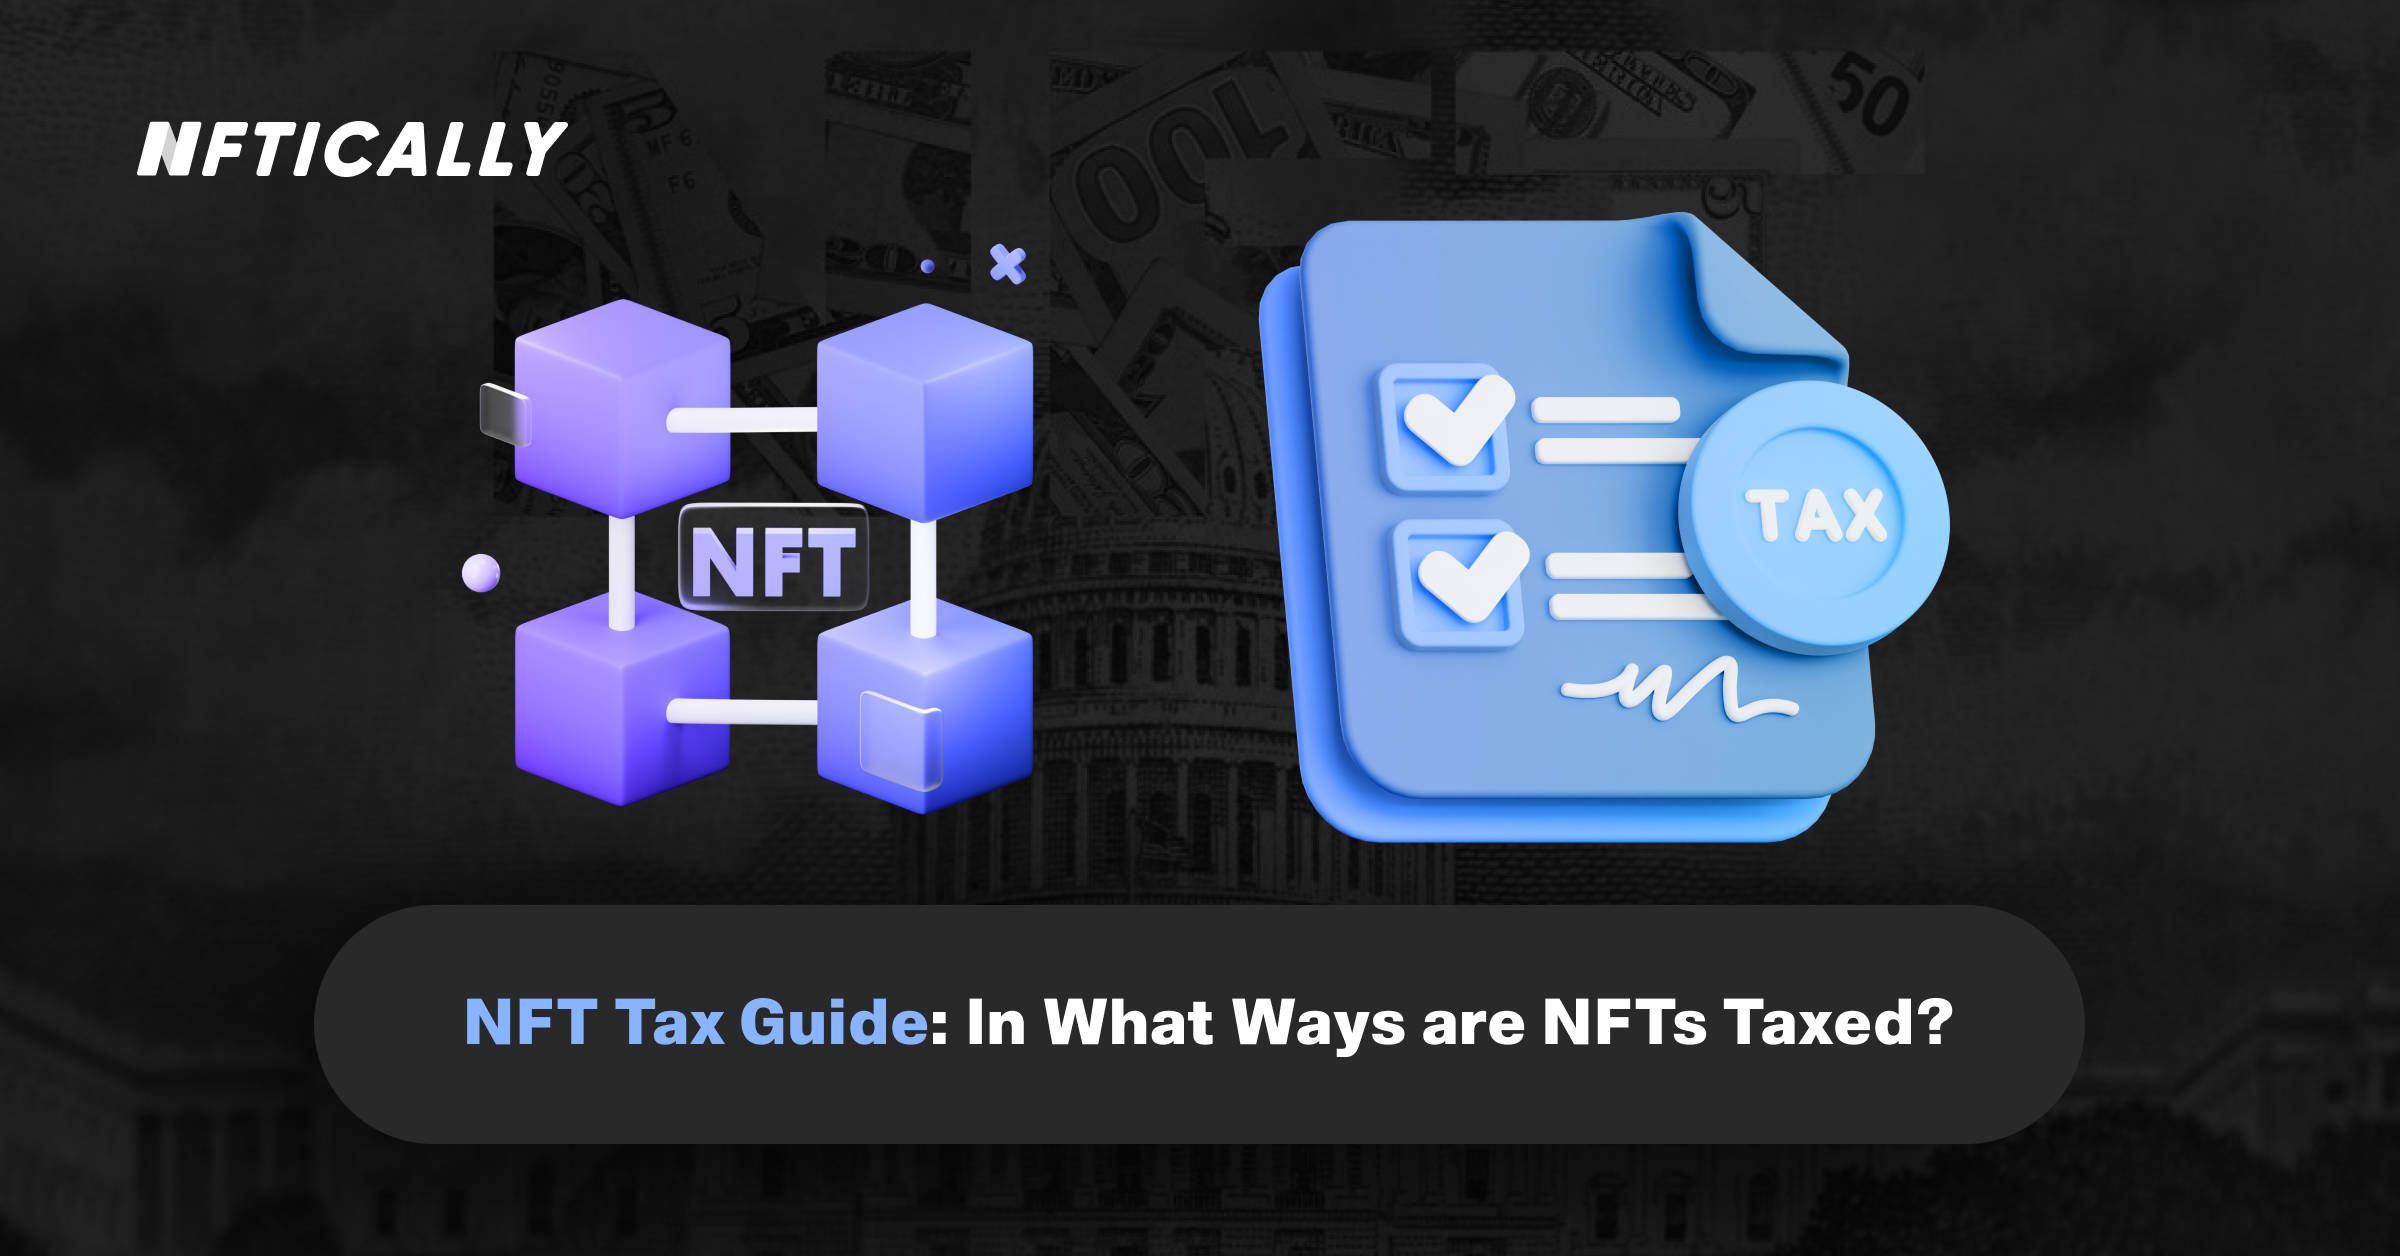 NFT Tax Guide: In What Ways are NFTs Taxed?